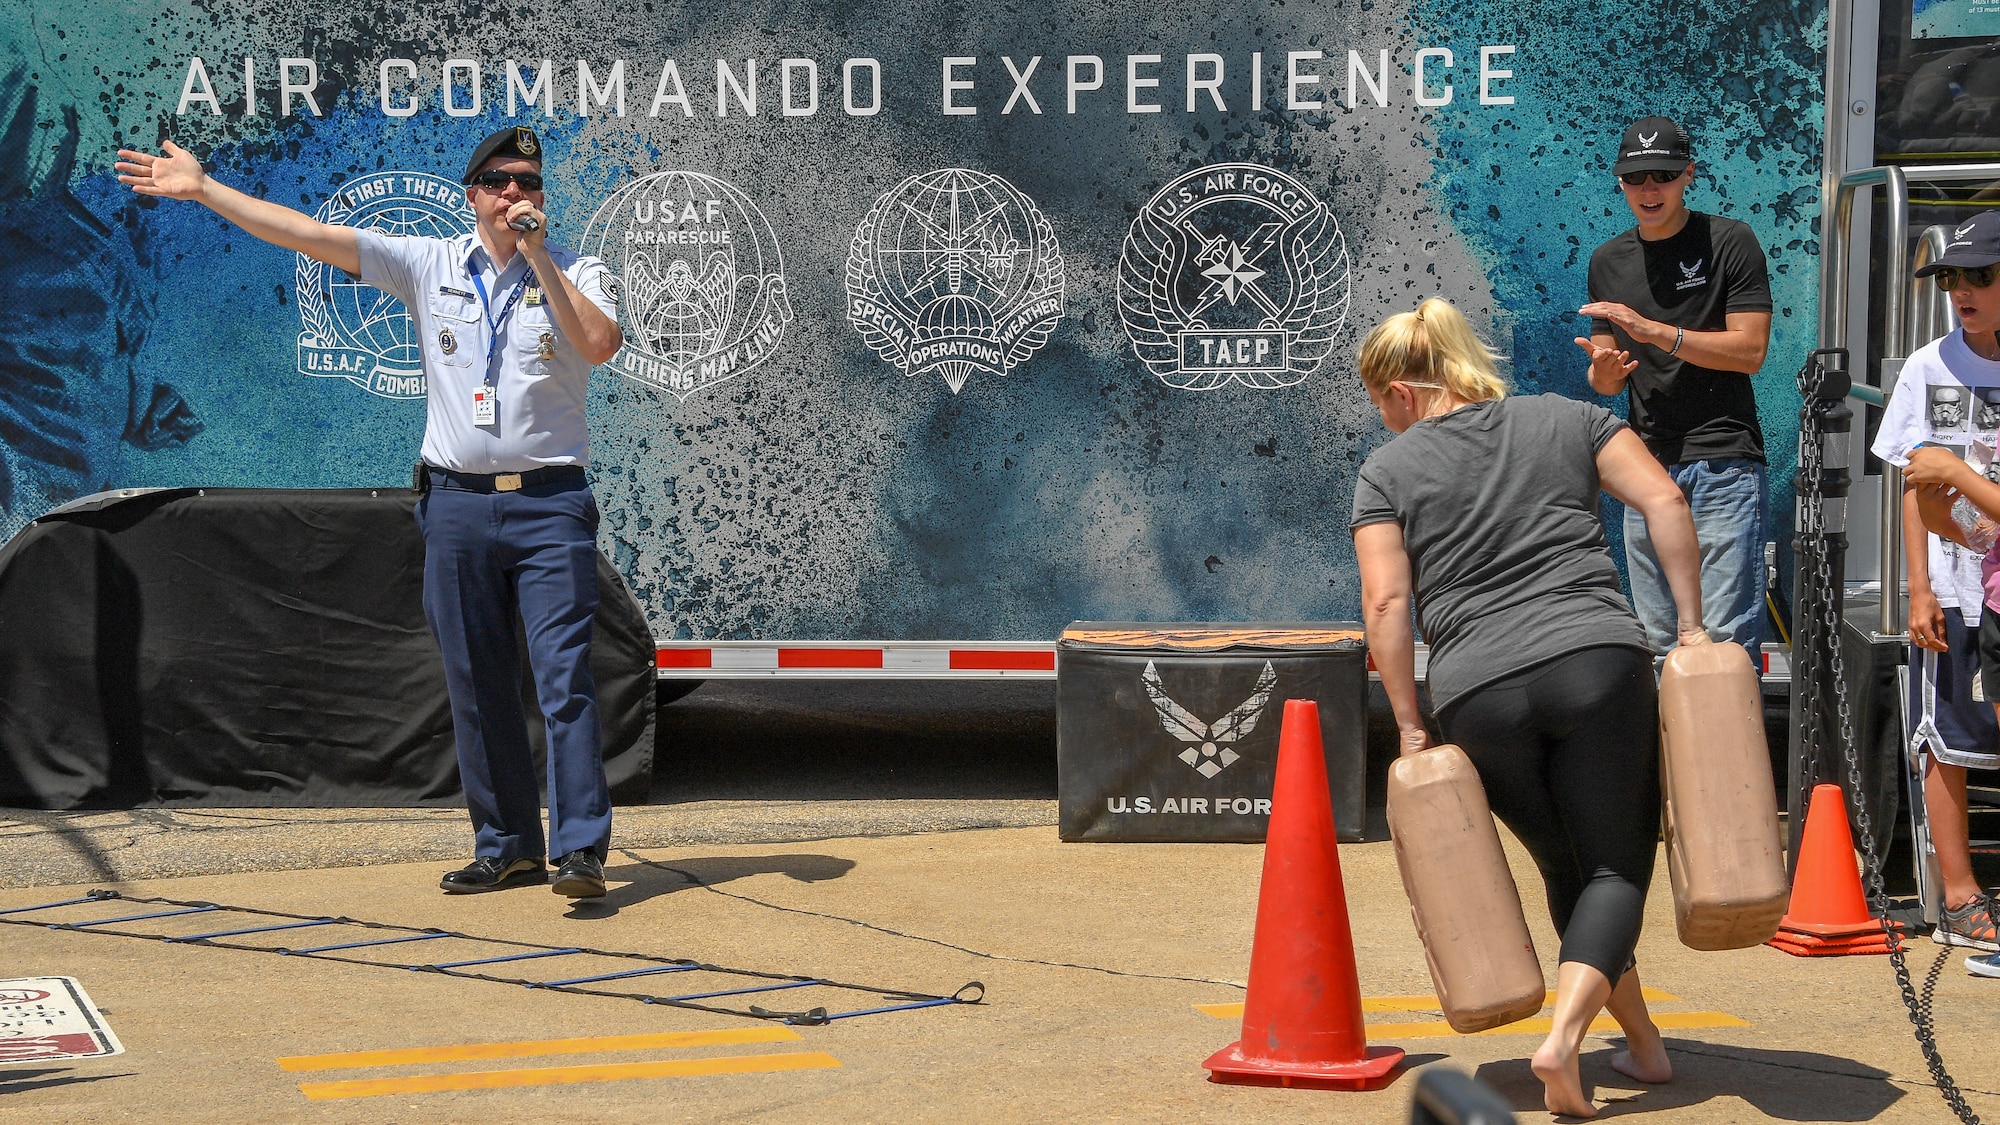 An air show visitor competes in the Air Commando Special Ops skills challenge during the Warriors Over the Wasatch Air and Space Show June 23, 2018, at Hill Air Force Base, Utah. 'The Air Force Special Ops Air Commando Experience' was brought to the air show by the 368th Recruiting Squadron. (U.S. Air Force photo by R. Nial Bradshaw)